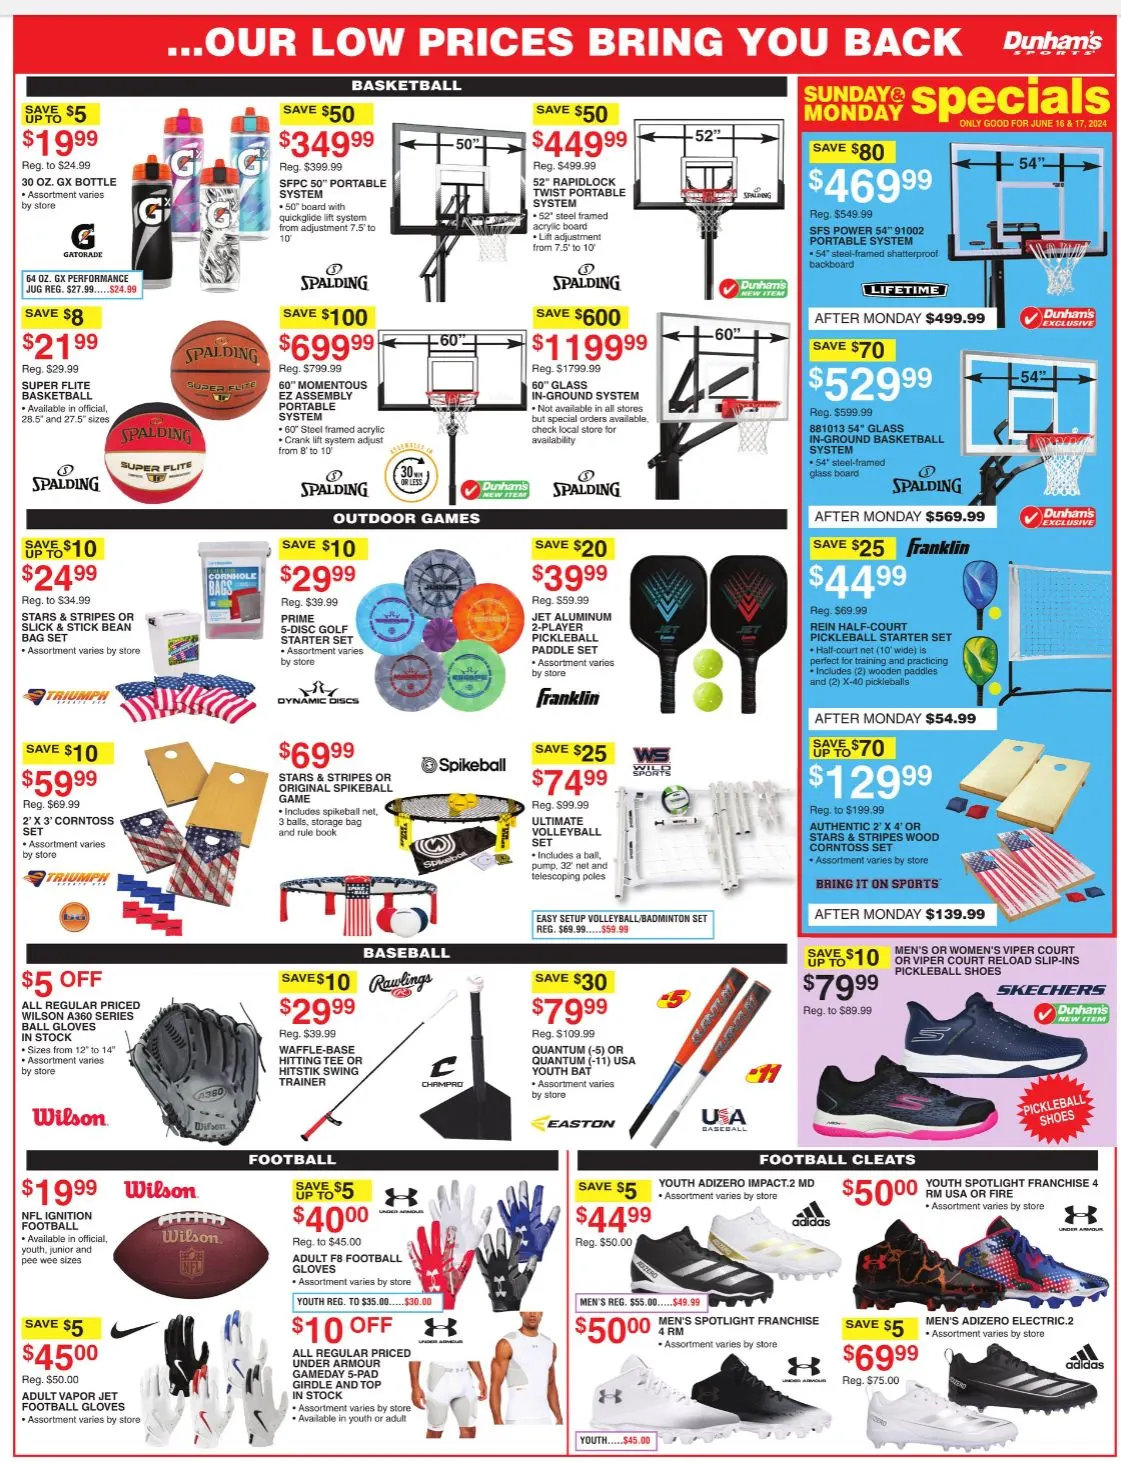 Dunham's July 2024 Weekly Sales, Deals, Discounts and Digital Coupons.